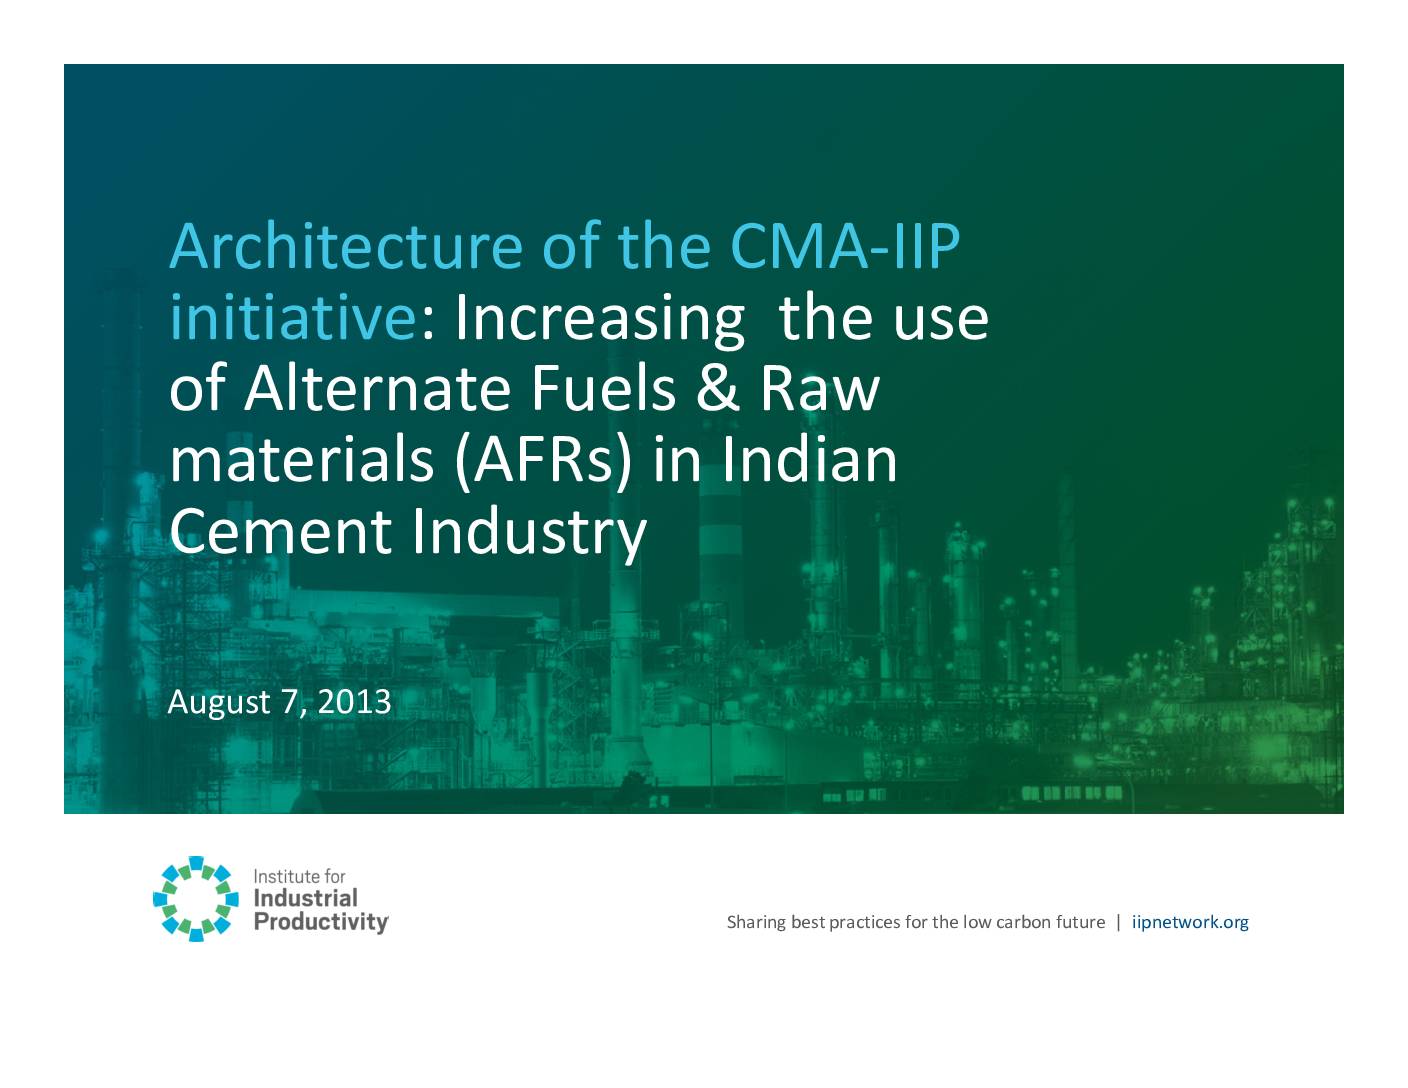 Architecture of the CMA-IIP initiative: Increasing the use of Alternate Fuels & Raw materials (AFRs) in Indian Cement Industry